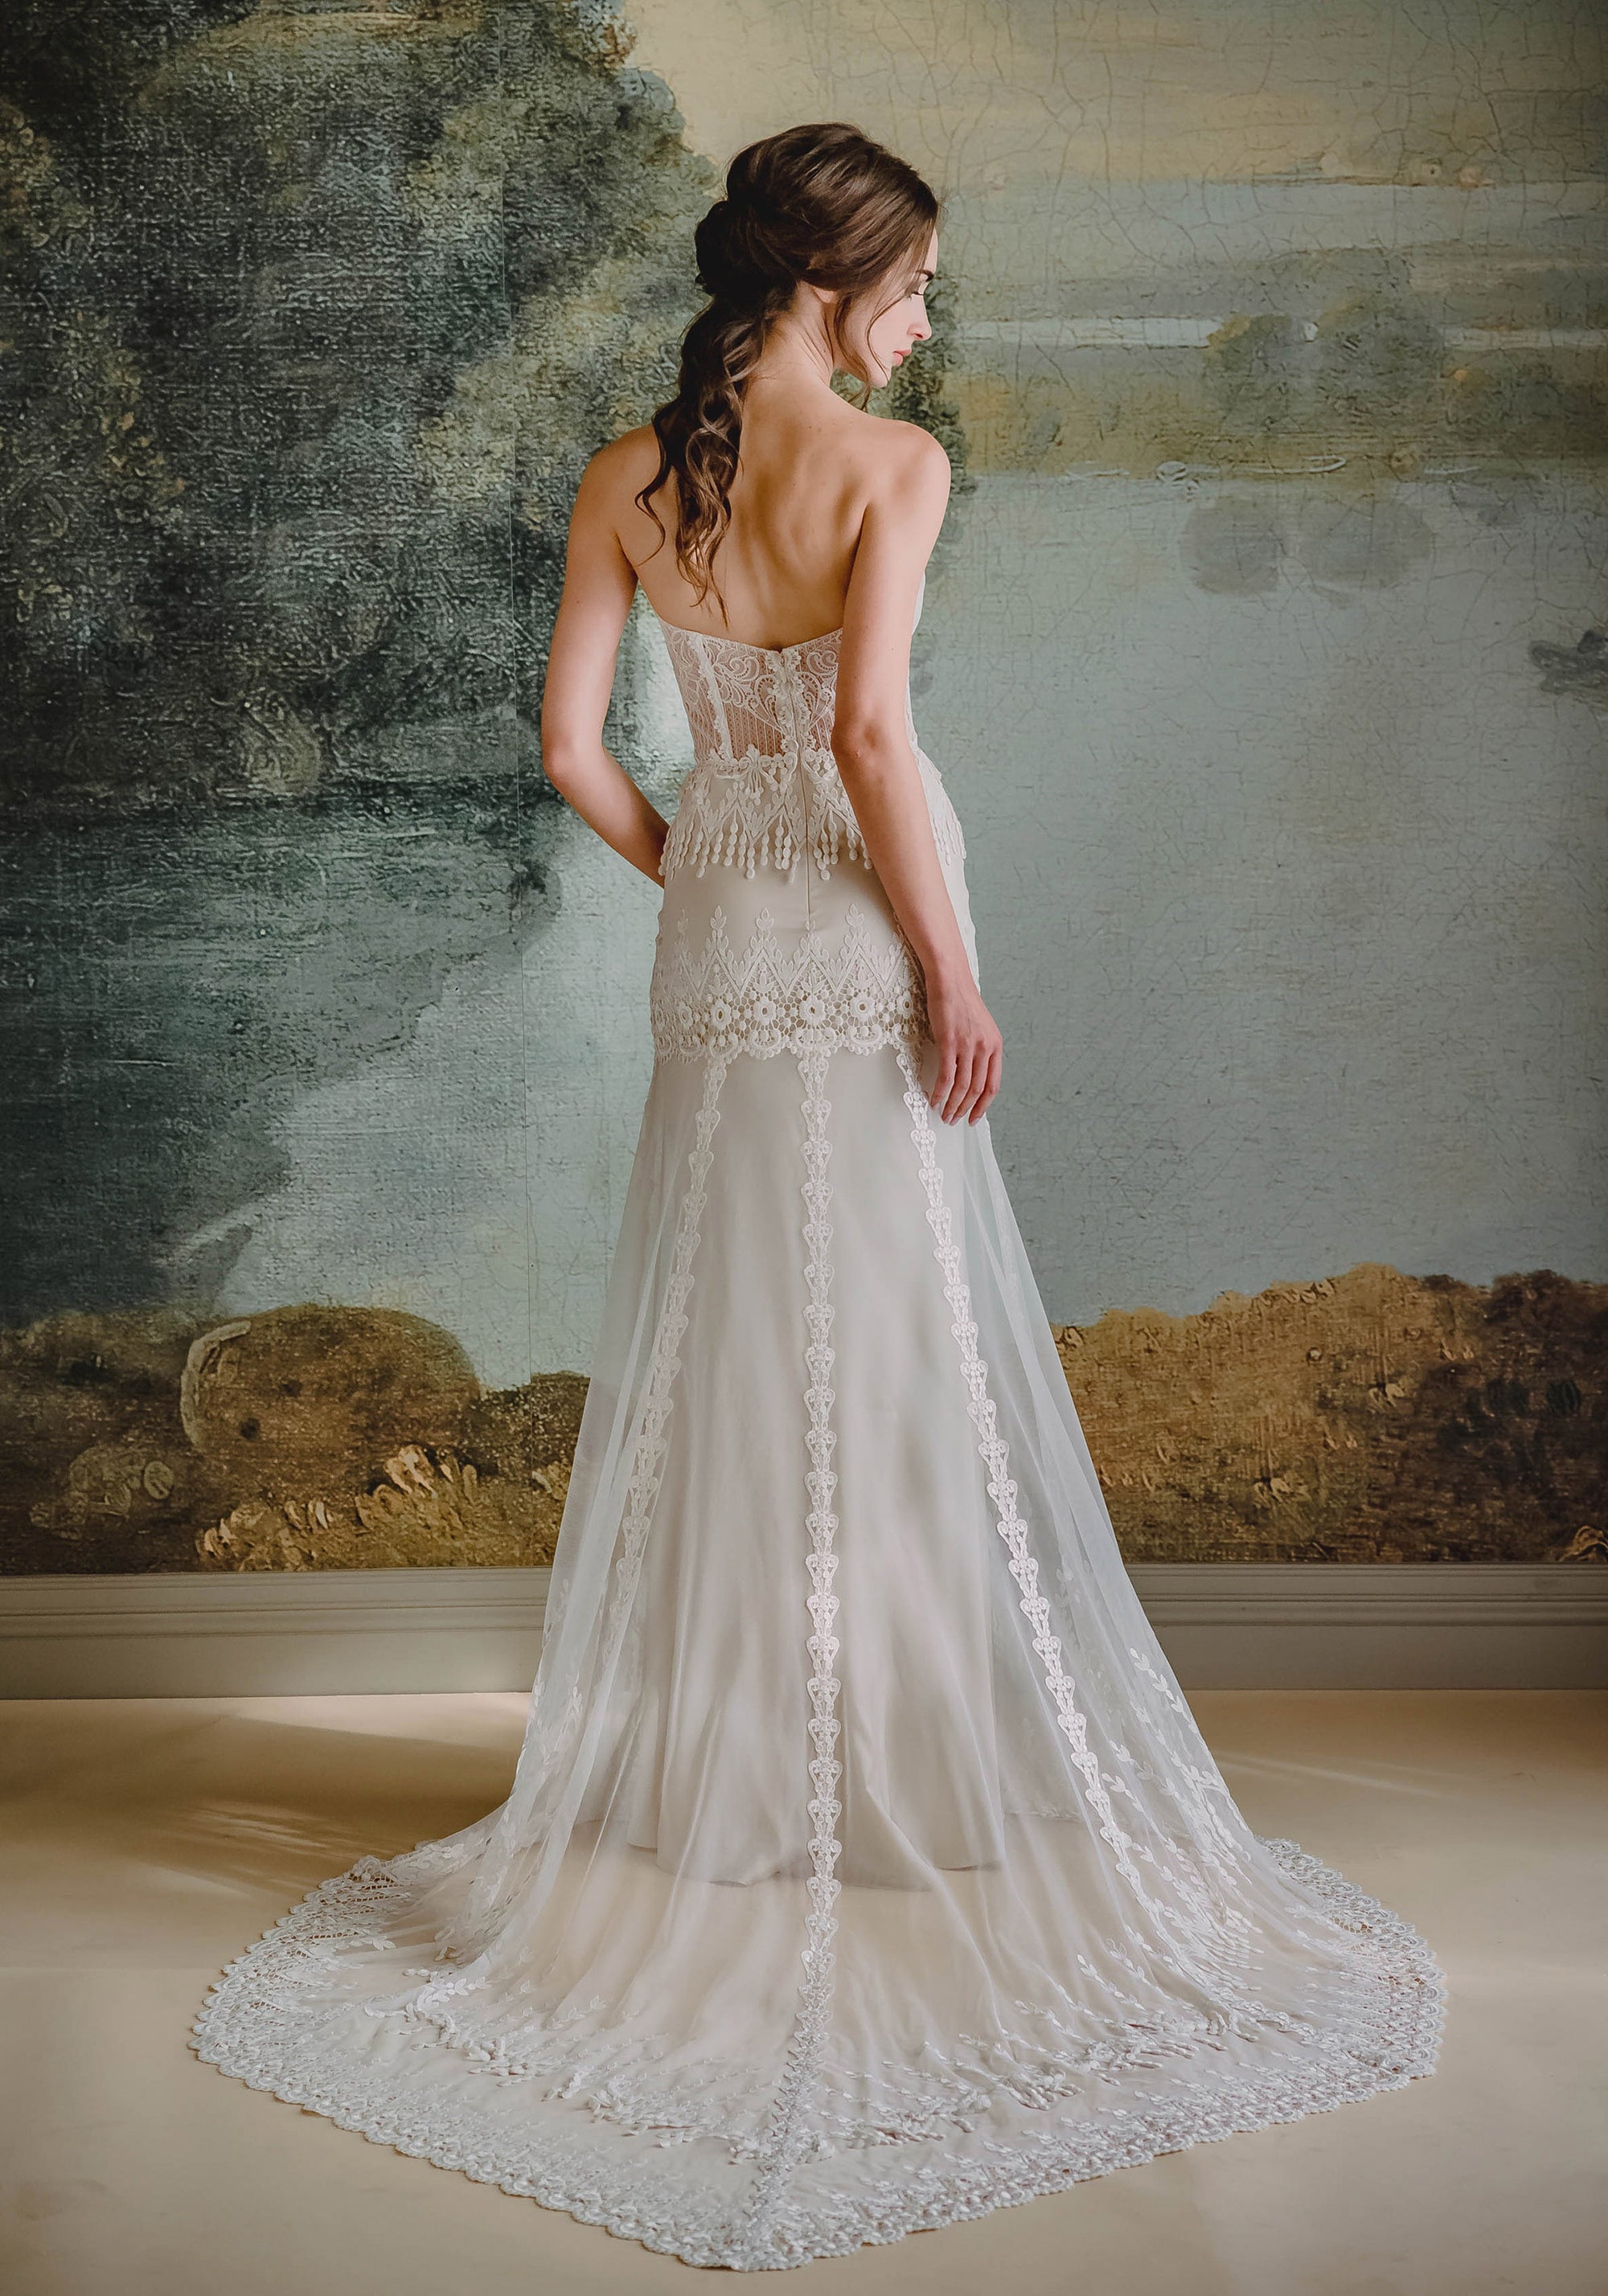 Victoriana Vintage Inspired Bridal Gown | Claire Pettibone – Claire ...